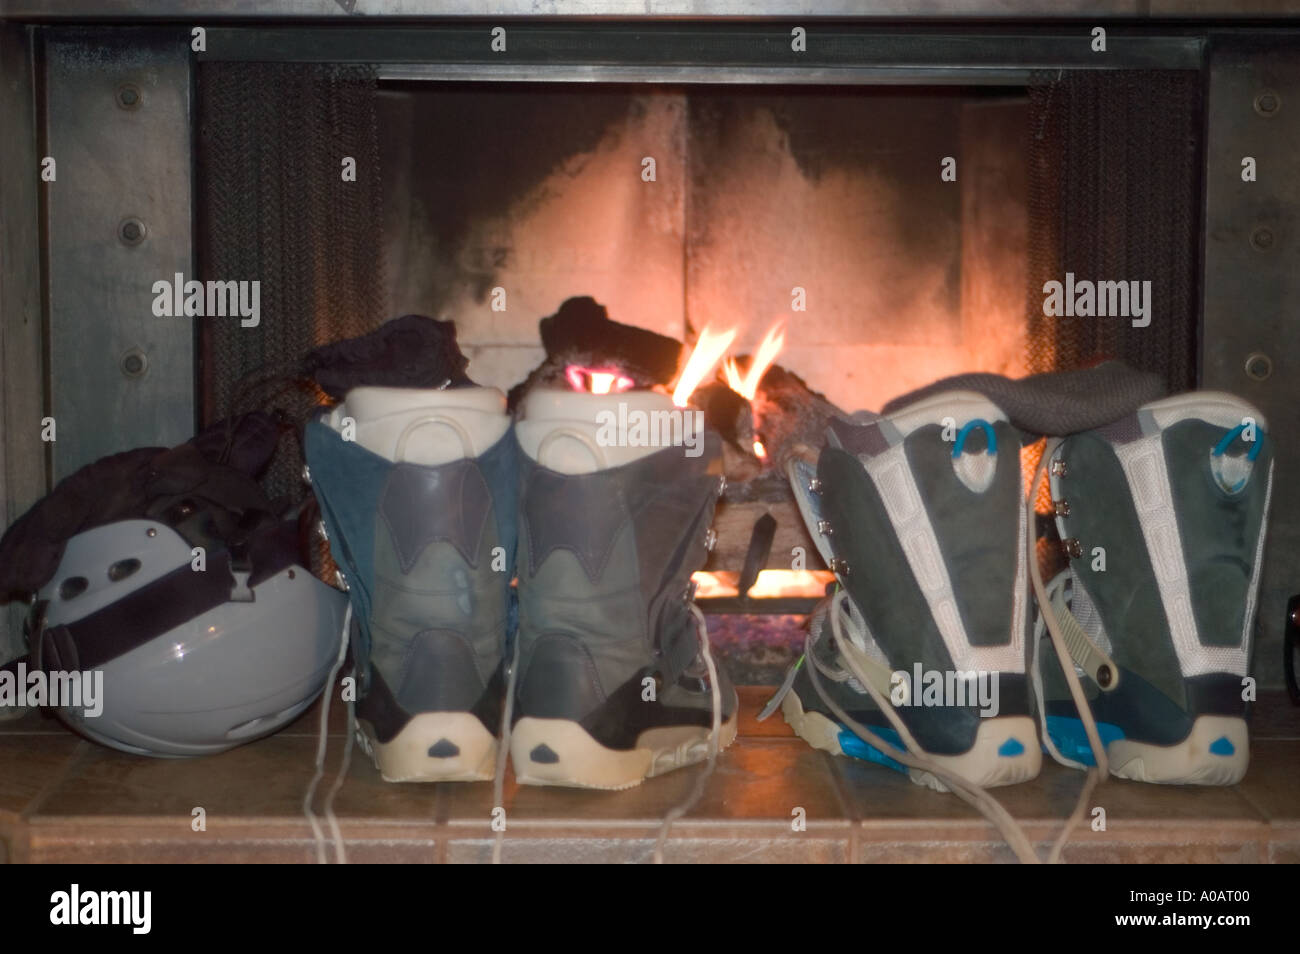 A color horizontal image of snowboard boots and a helmet drying in front of a fire Stock Photo